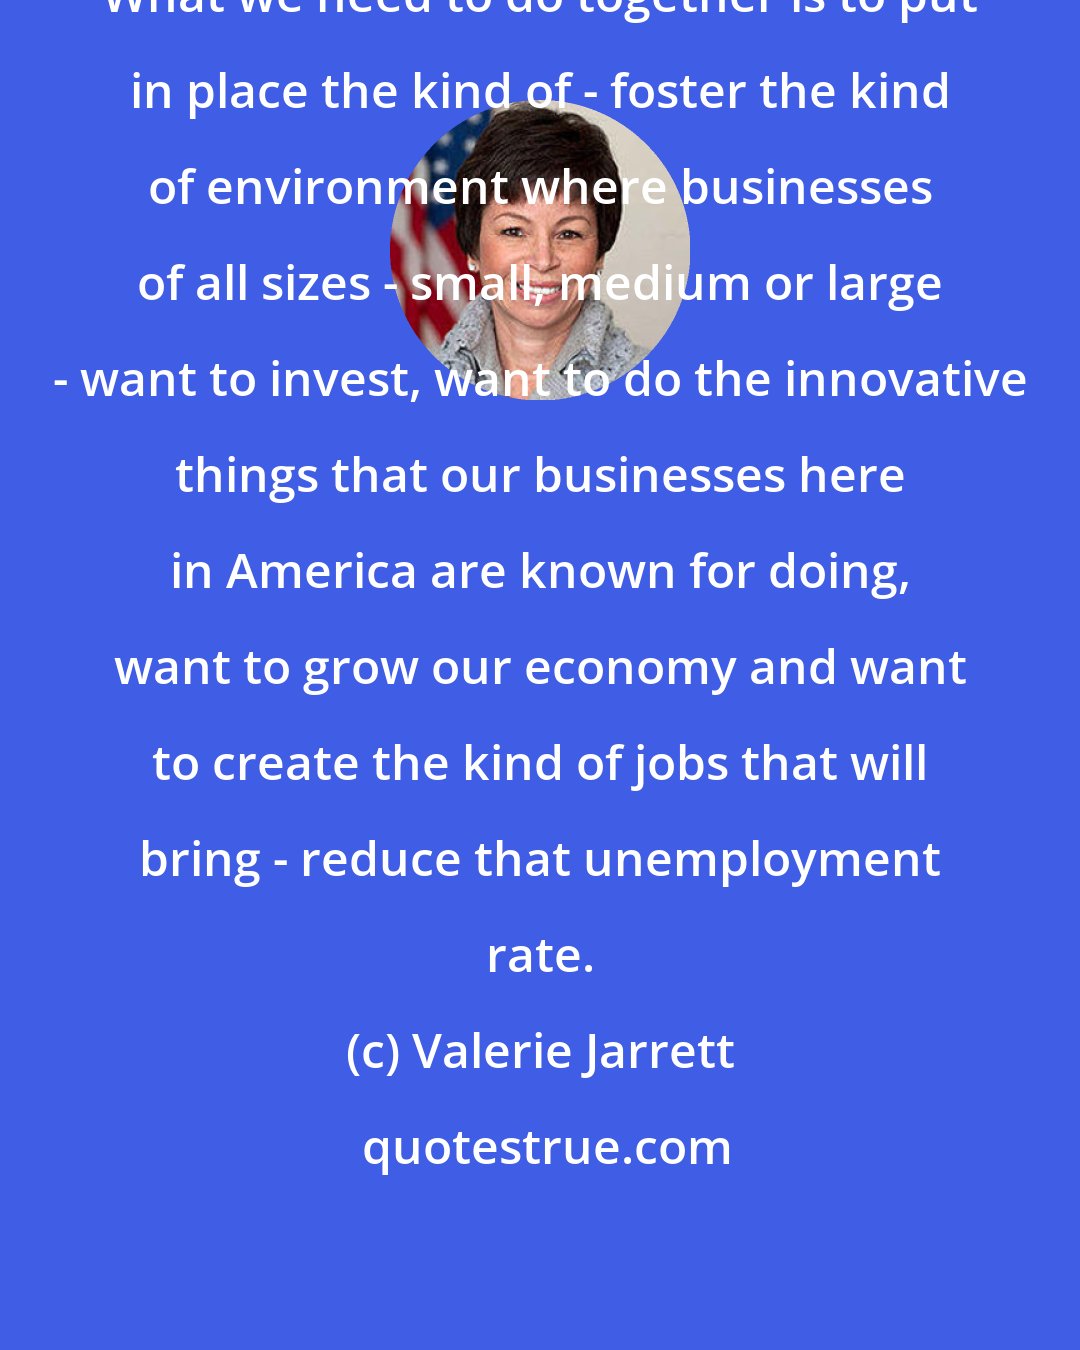 Valerie Jarrett: What we need to do together is to put in place the kind of - foster the kind of environment where businesses of all sizes - small, medium or large - want to invest, want to do the innovative things that our businesses here in America are known for doing, want to grow our economy and want to create the kind of jobs that will bring - reduce that unemployment rate.